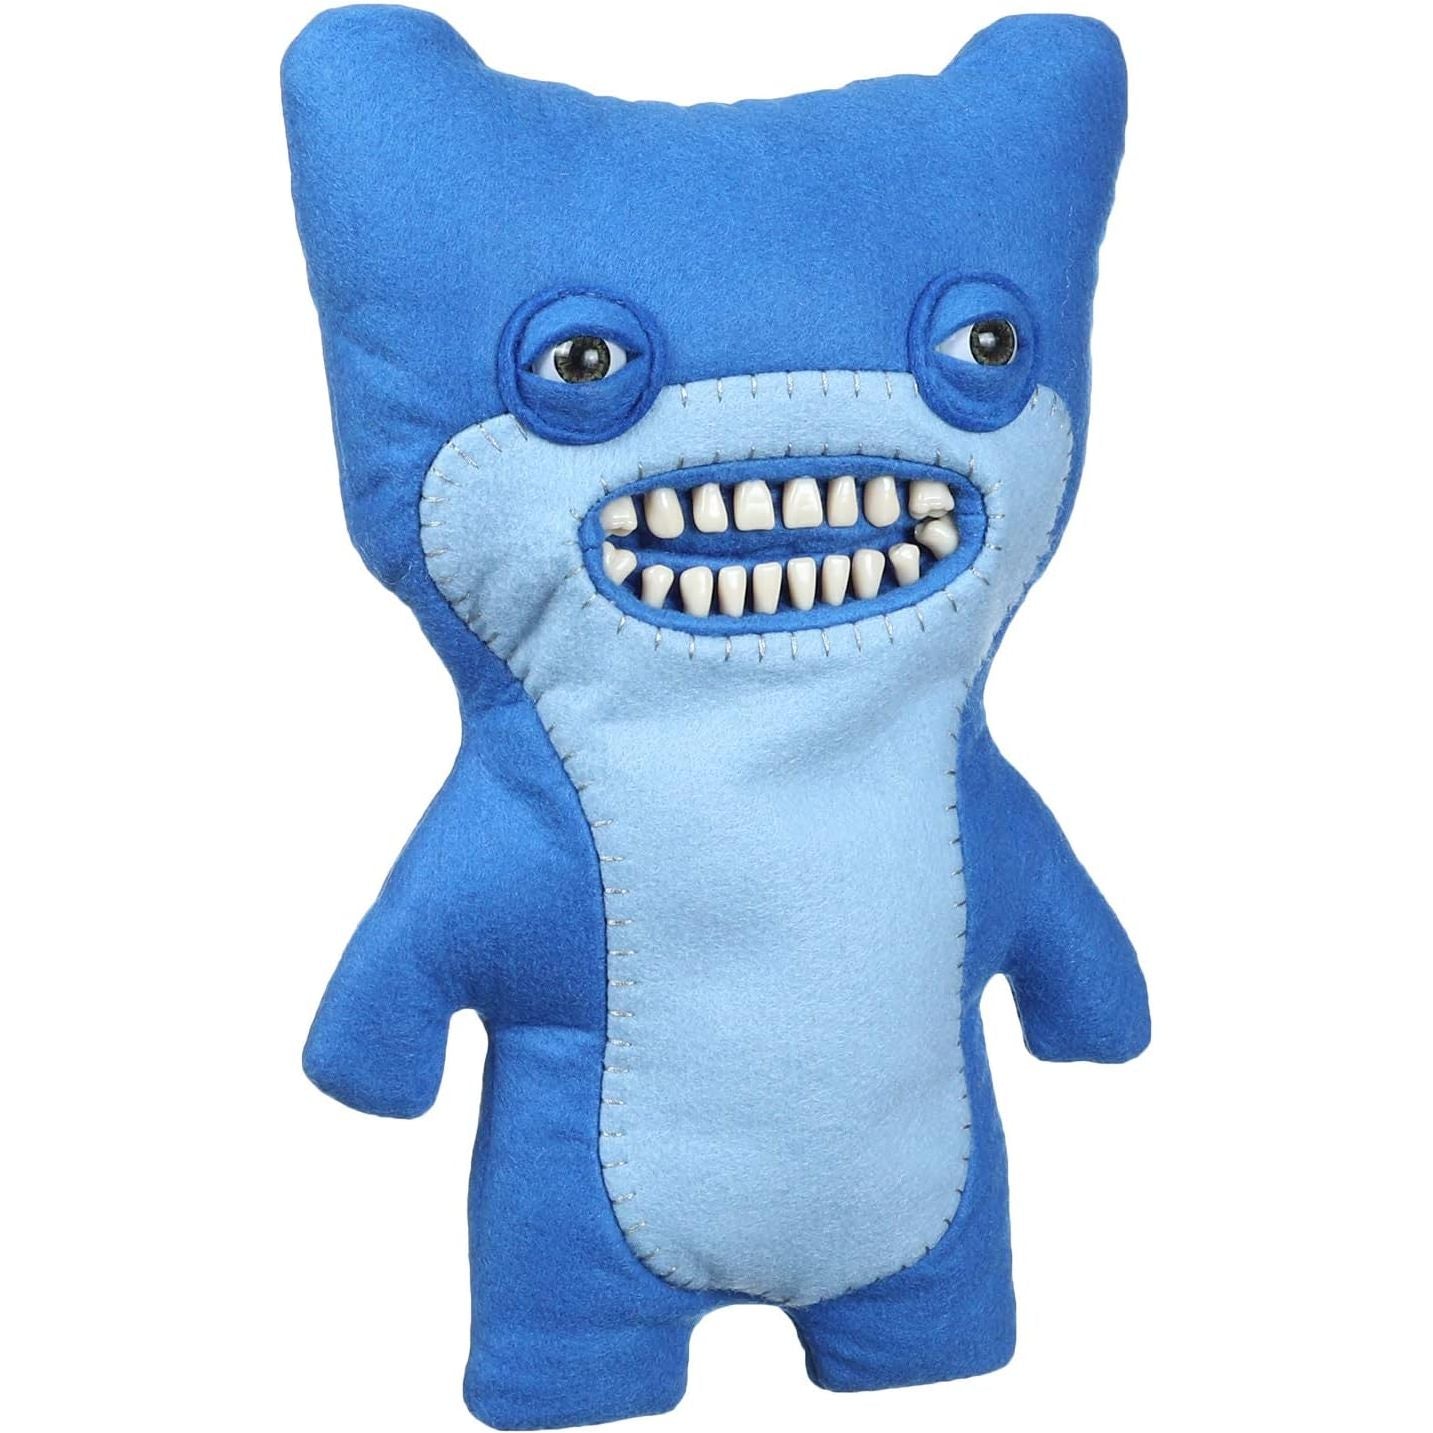 Fugglers Funny Ugly Monster Plush Toy for Boys - Blue